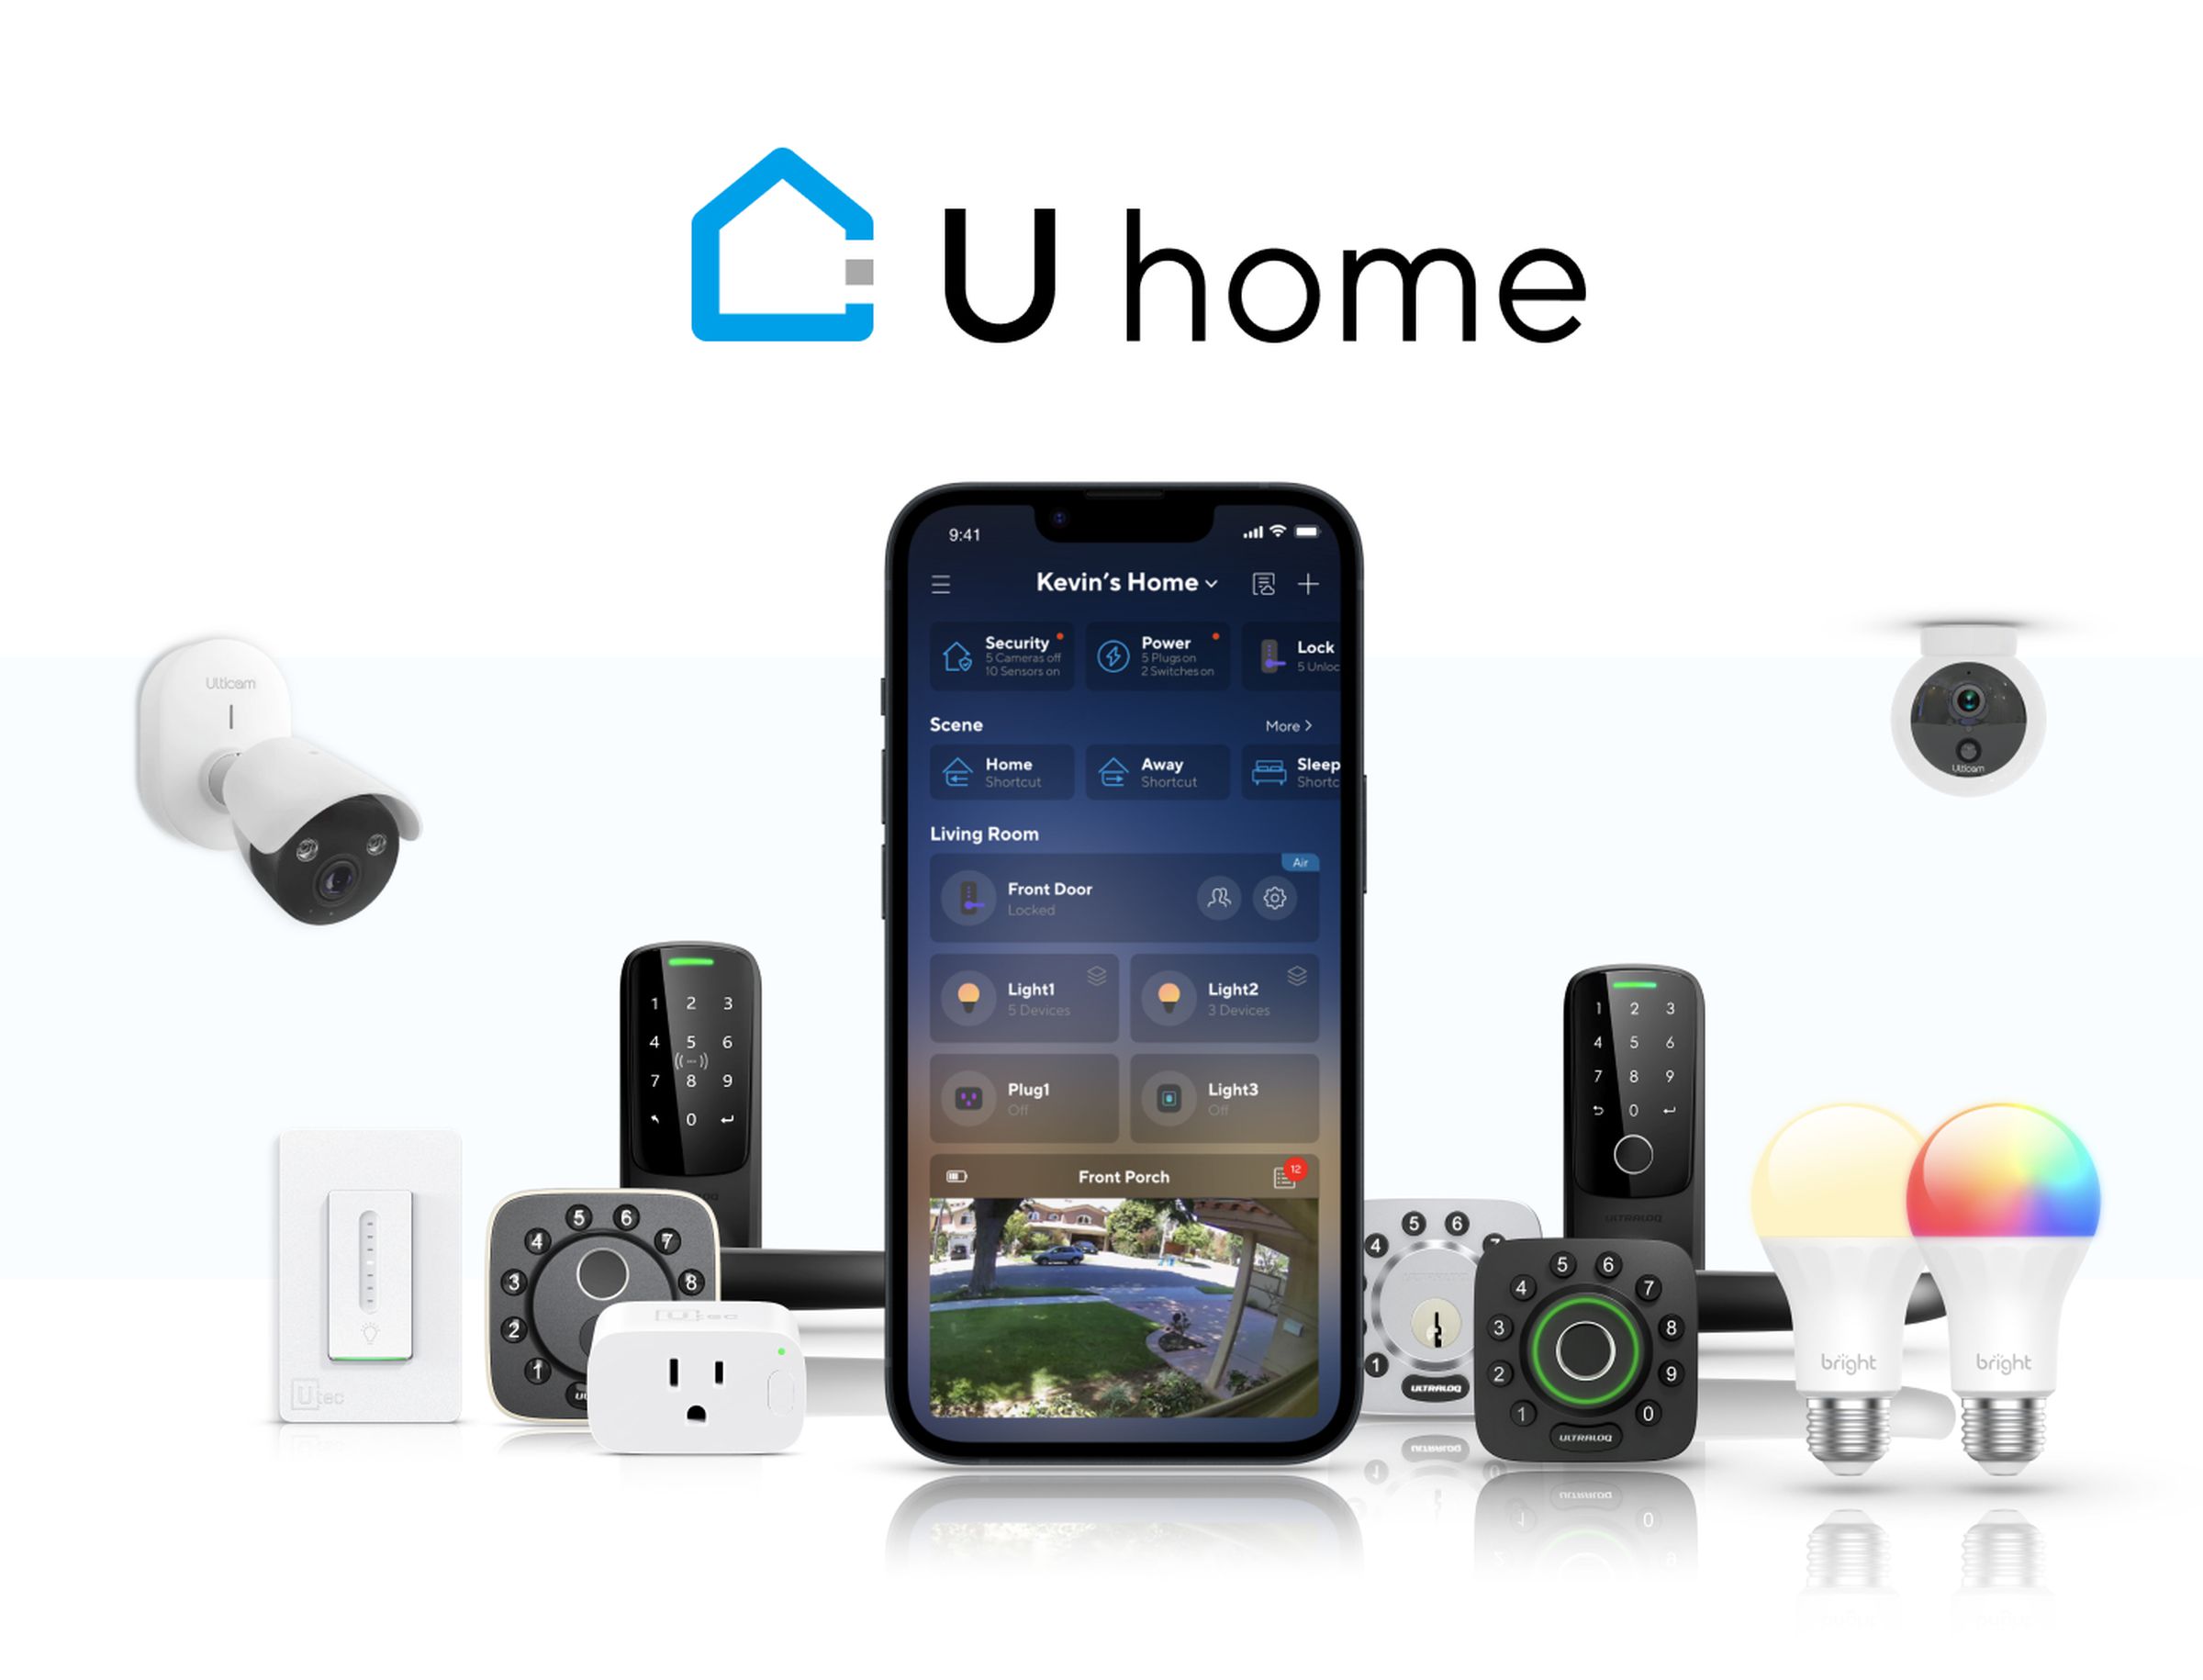 U-tec is launching smart bulbs, switches, plugs, and cameras along with its new line of smart locks. Plus, a new app — U home — to control them all.